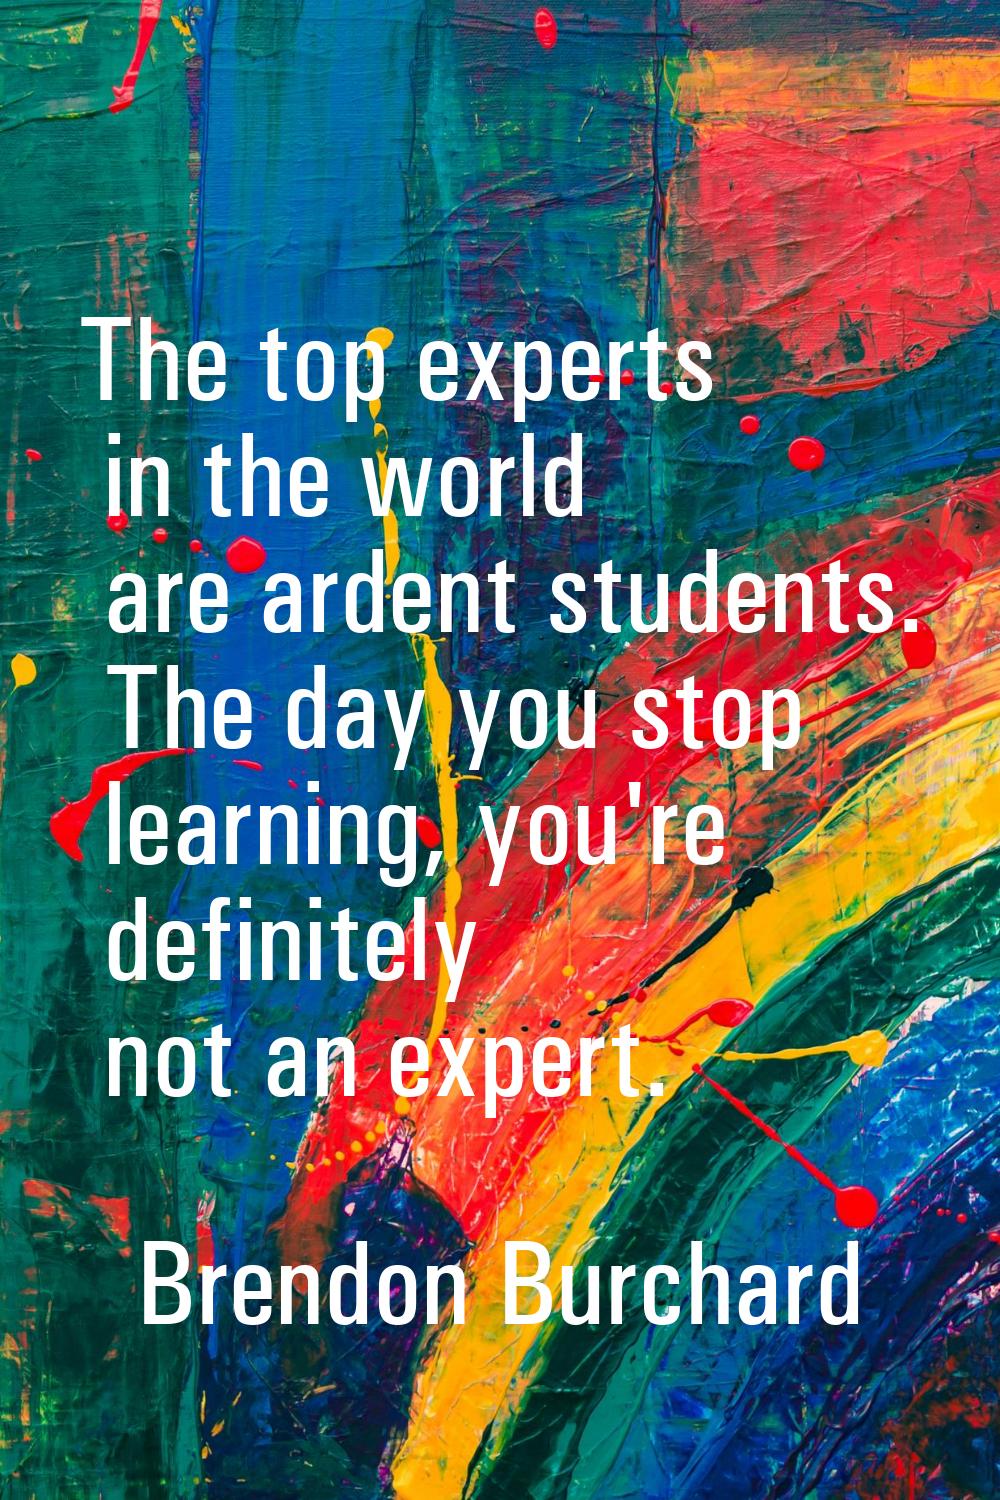 The top experts in the world are ardent students. The day you stop learning, you're definitely not 